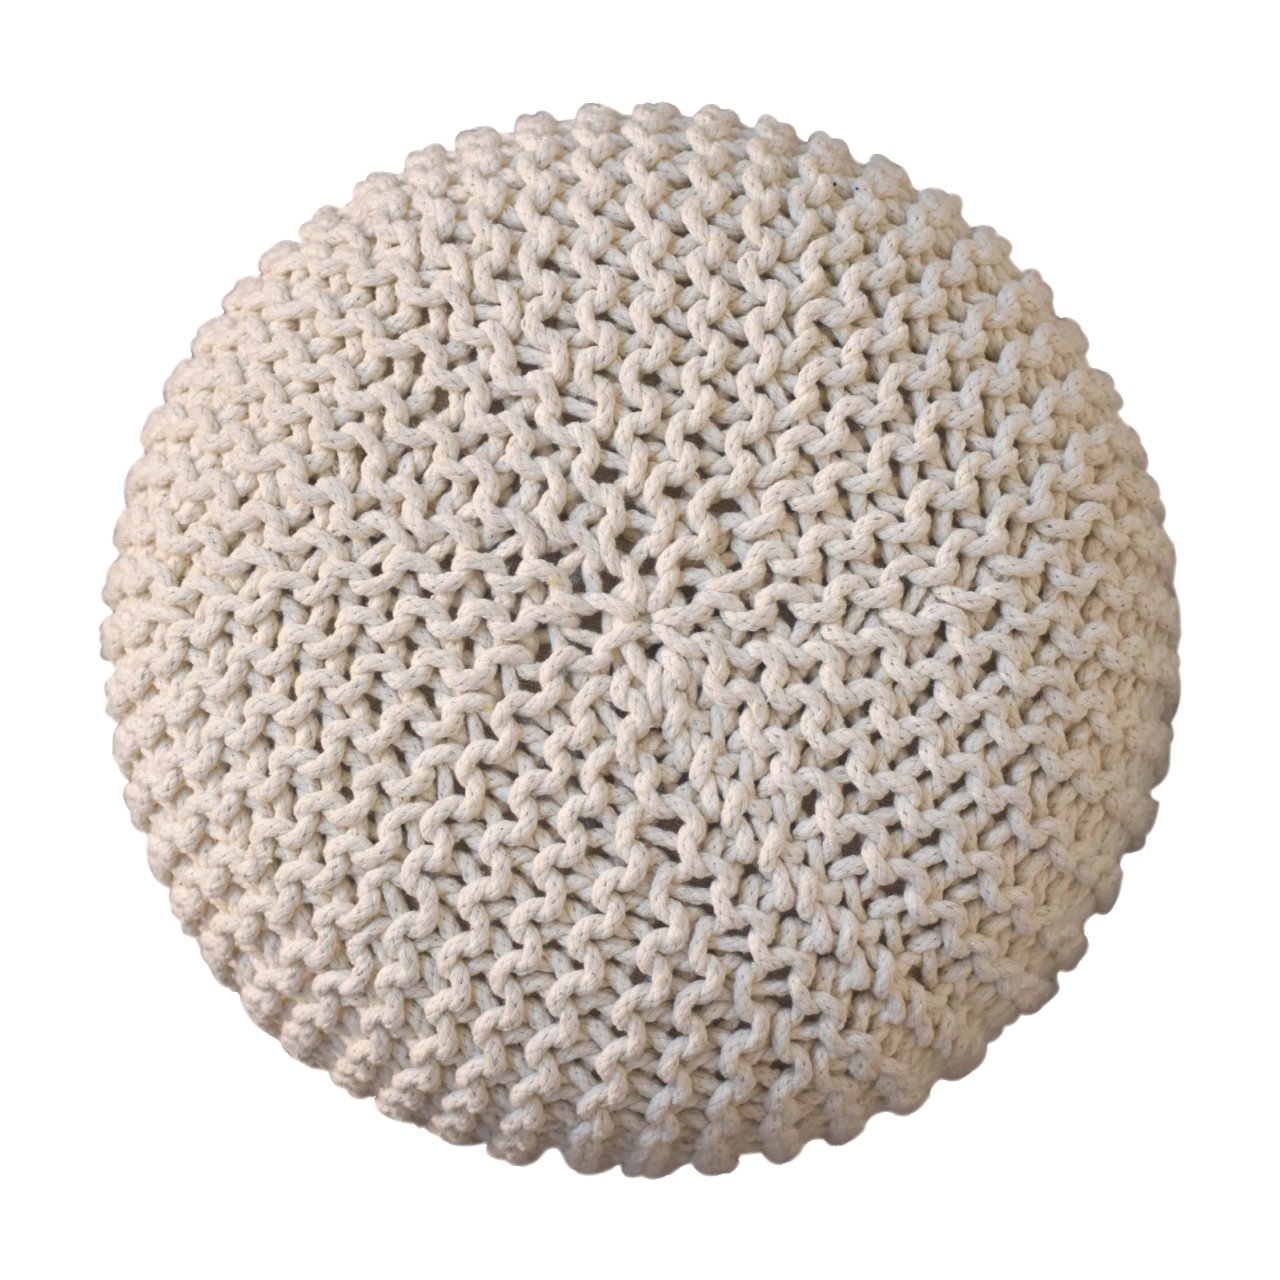 Off White Knitted Round Footstool in Oak Finish With Luxurious Cushioned Upholstery